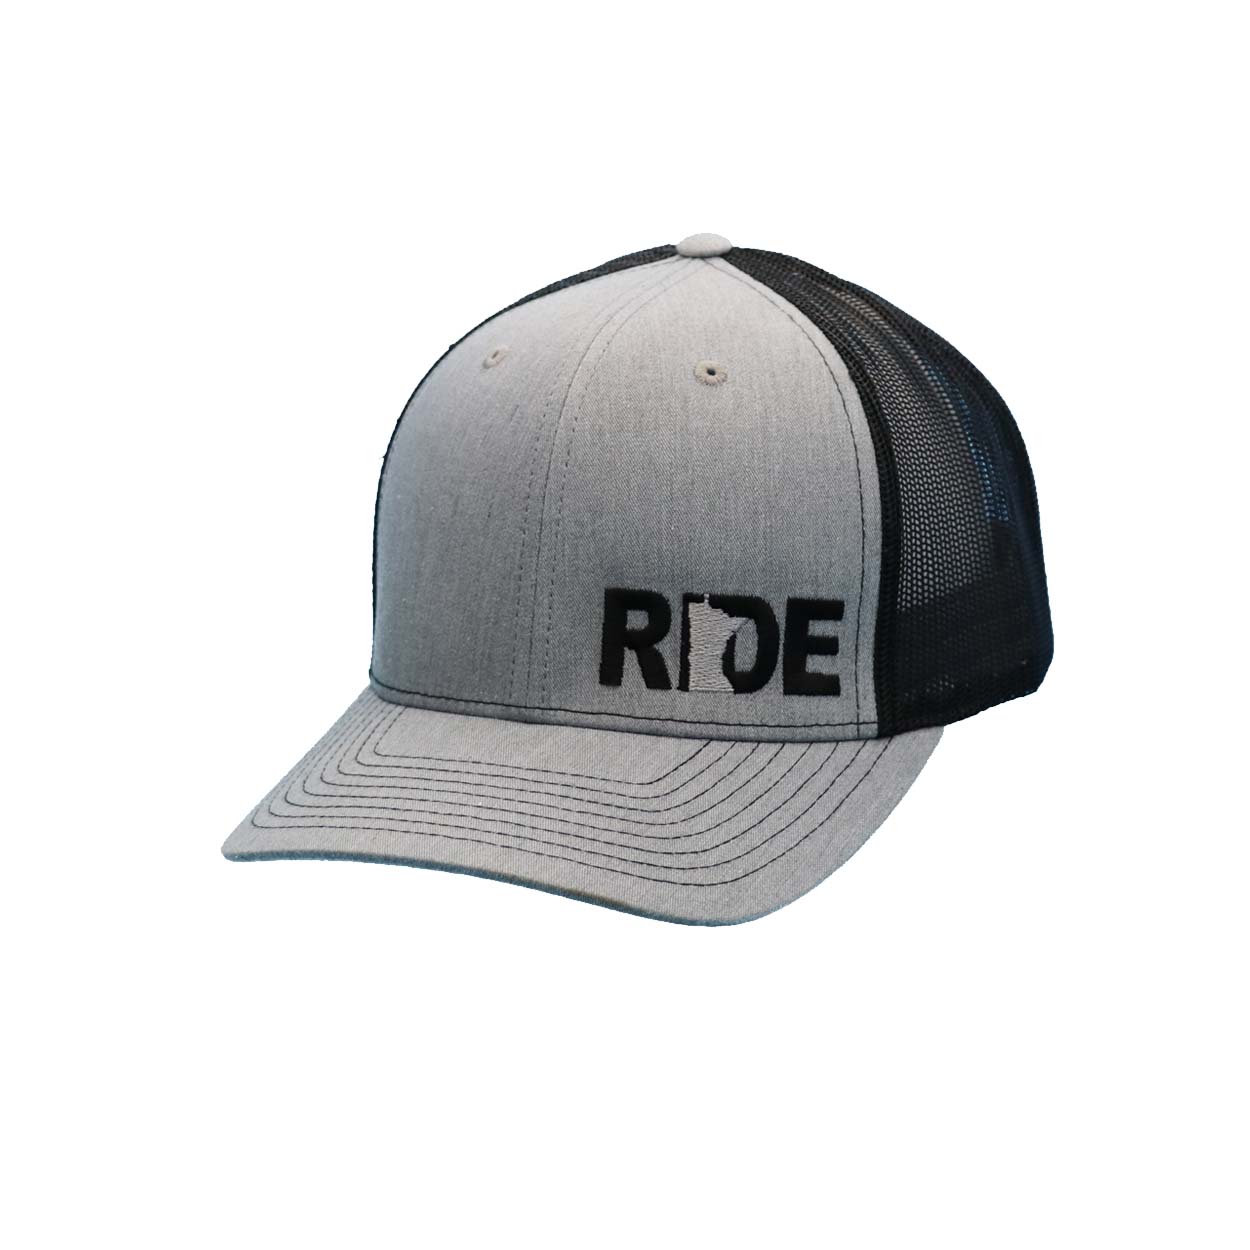 Ride Minnesota Classic Pro Night Out Embroidered Snapback Trucker Hat Heather Gray/Black